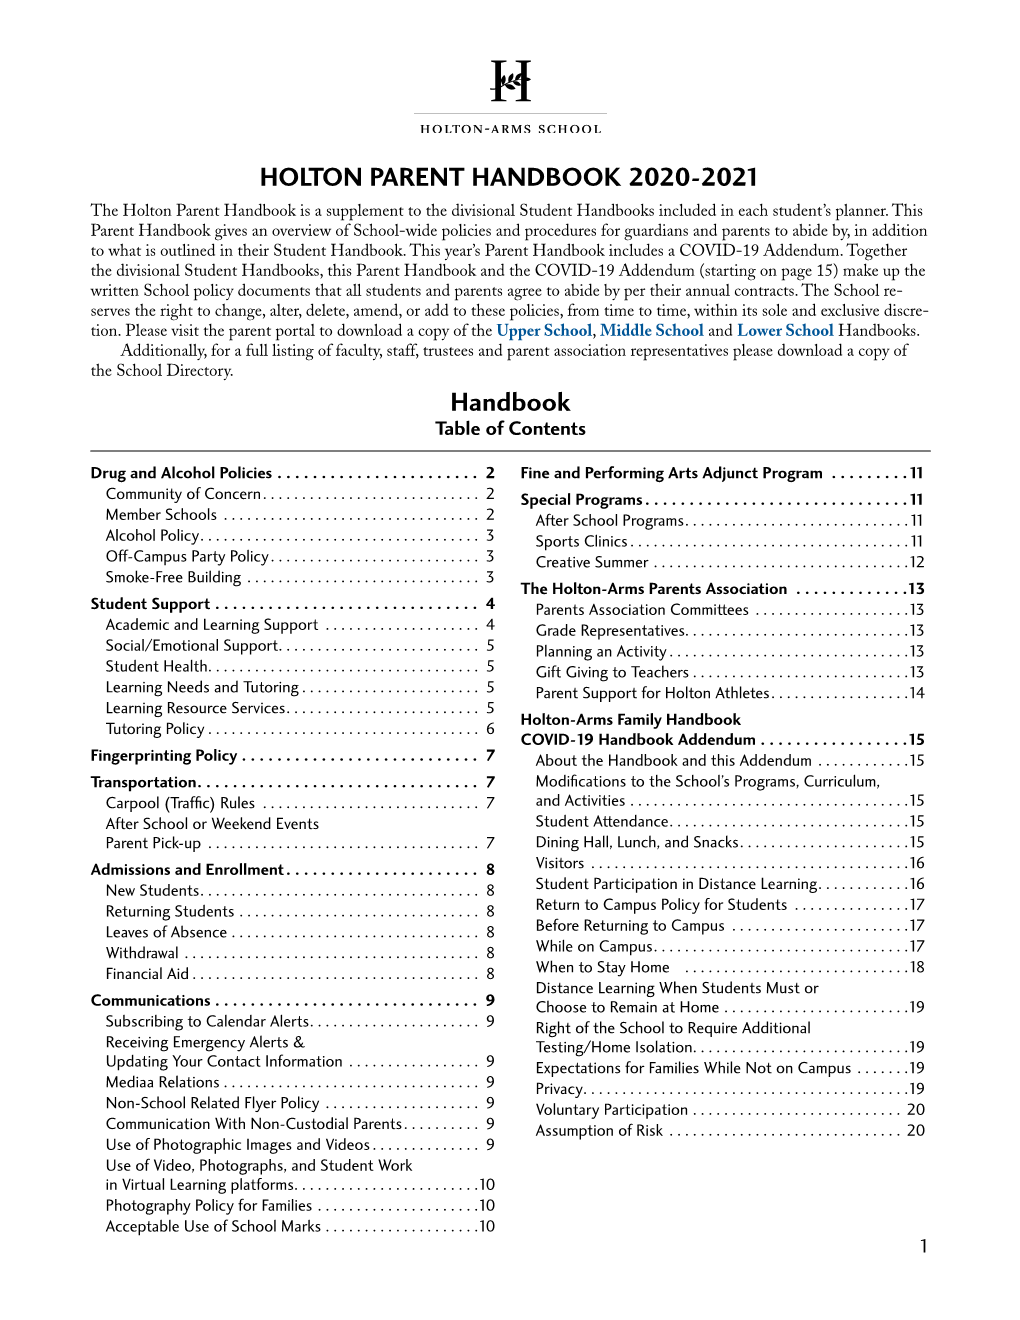 Parent Handbook 2020-2021 the Holton Parent Handbook Is a Supplement to the Divisional Student Handbooks Included in Each Student’S Planner